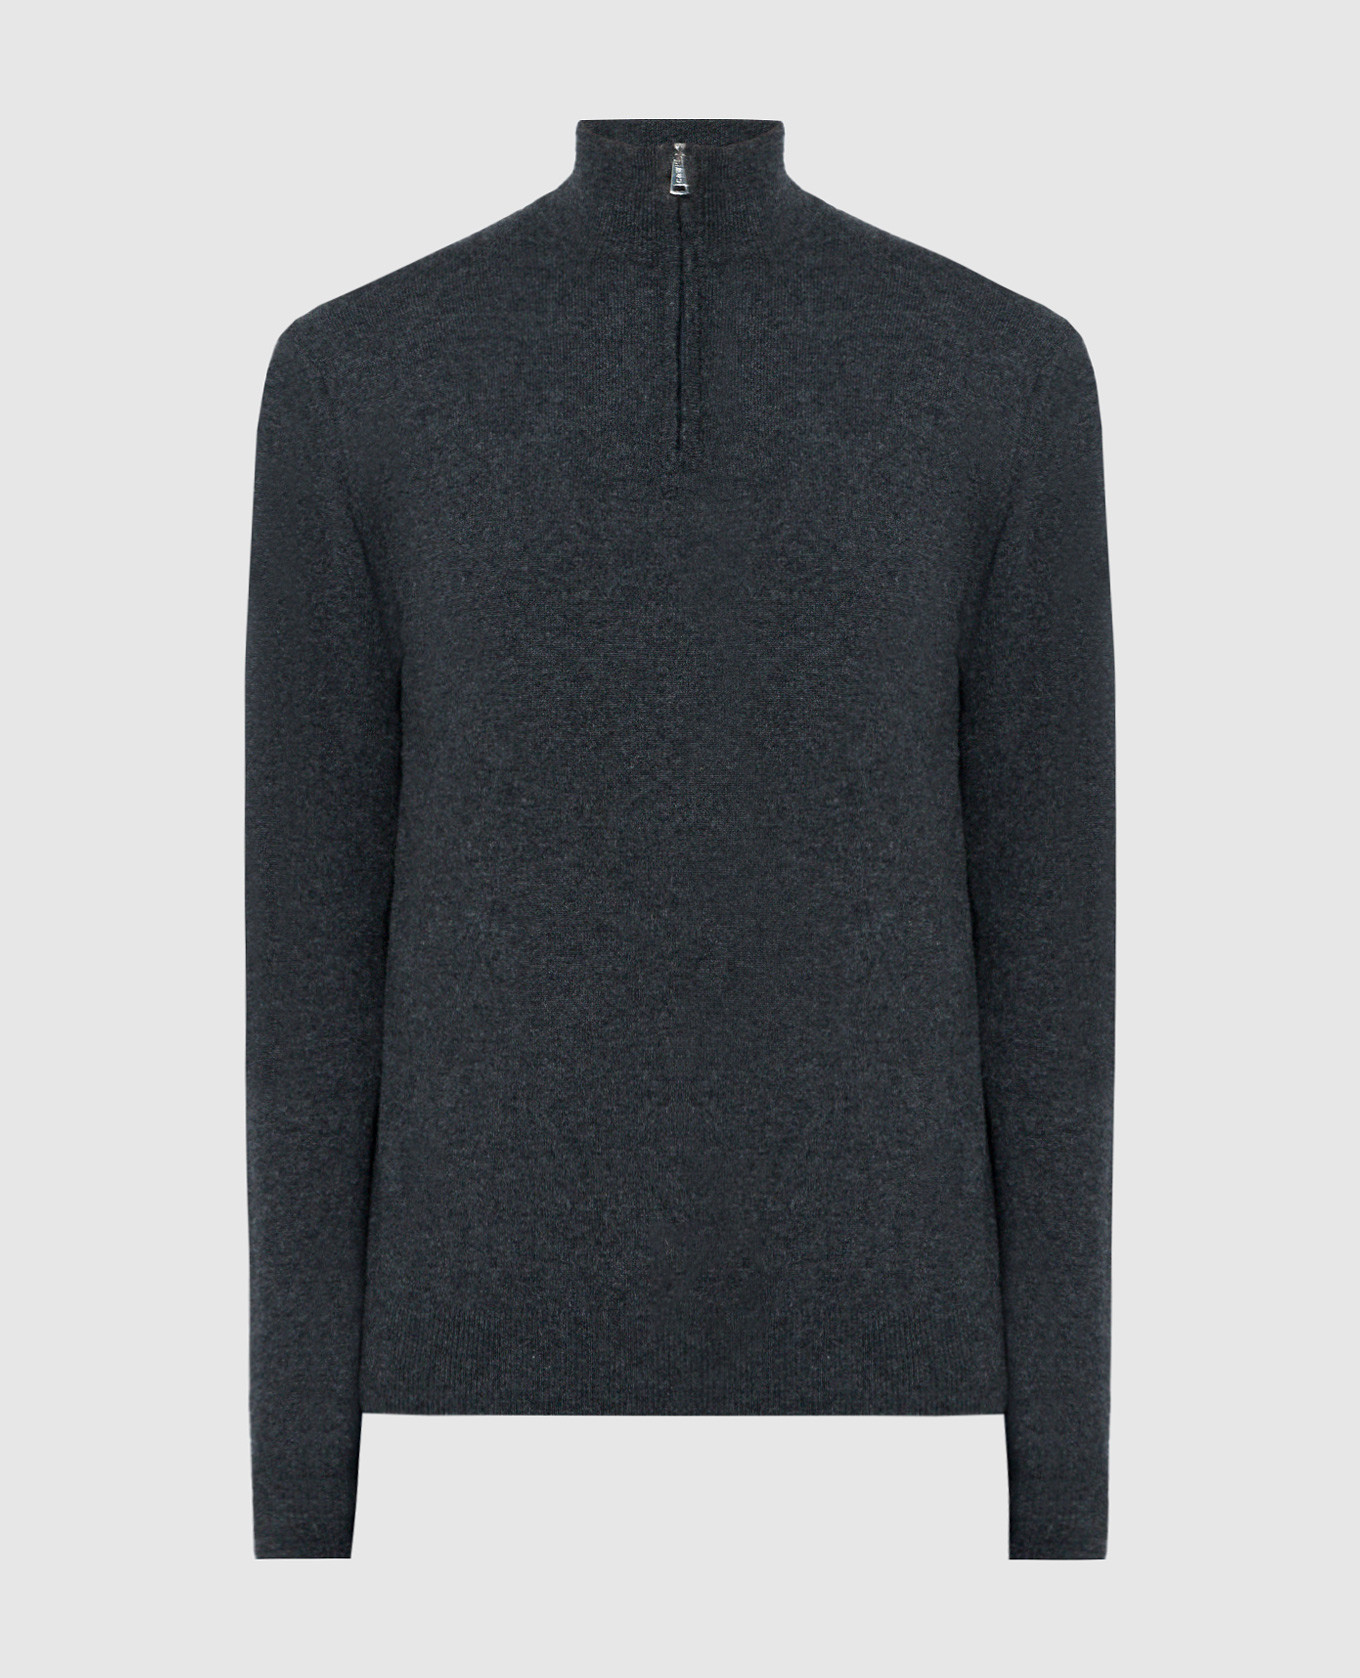 Gray cashmere jumper with zipper